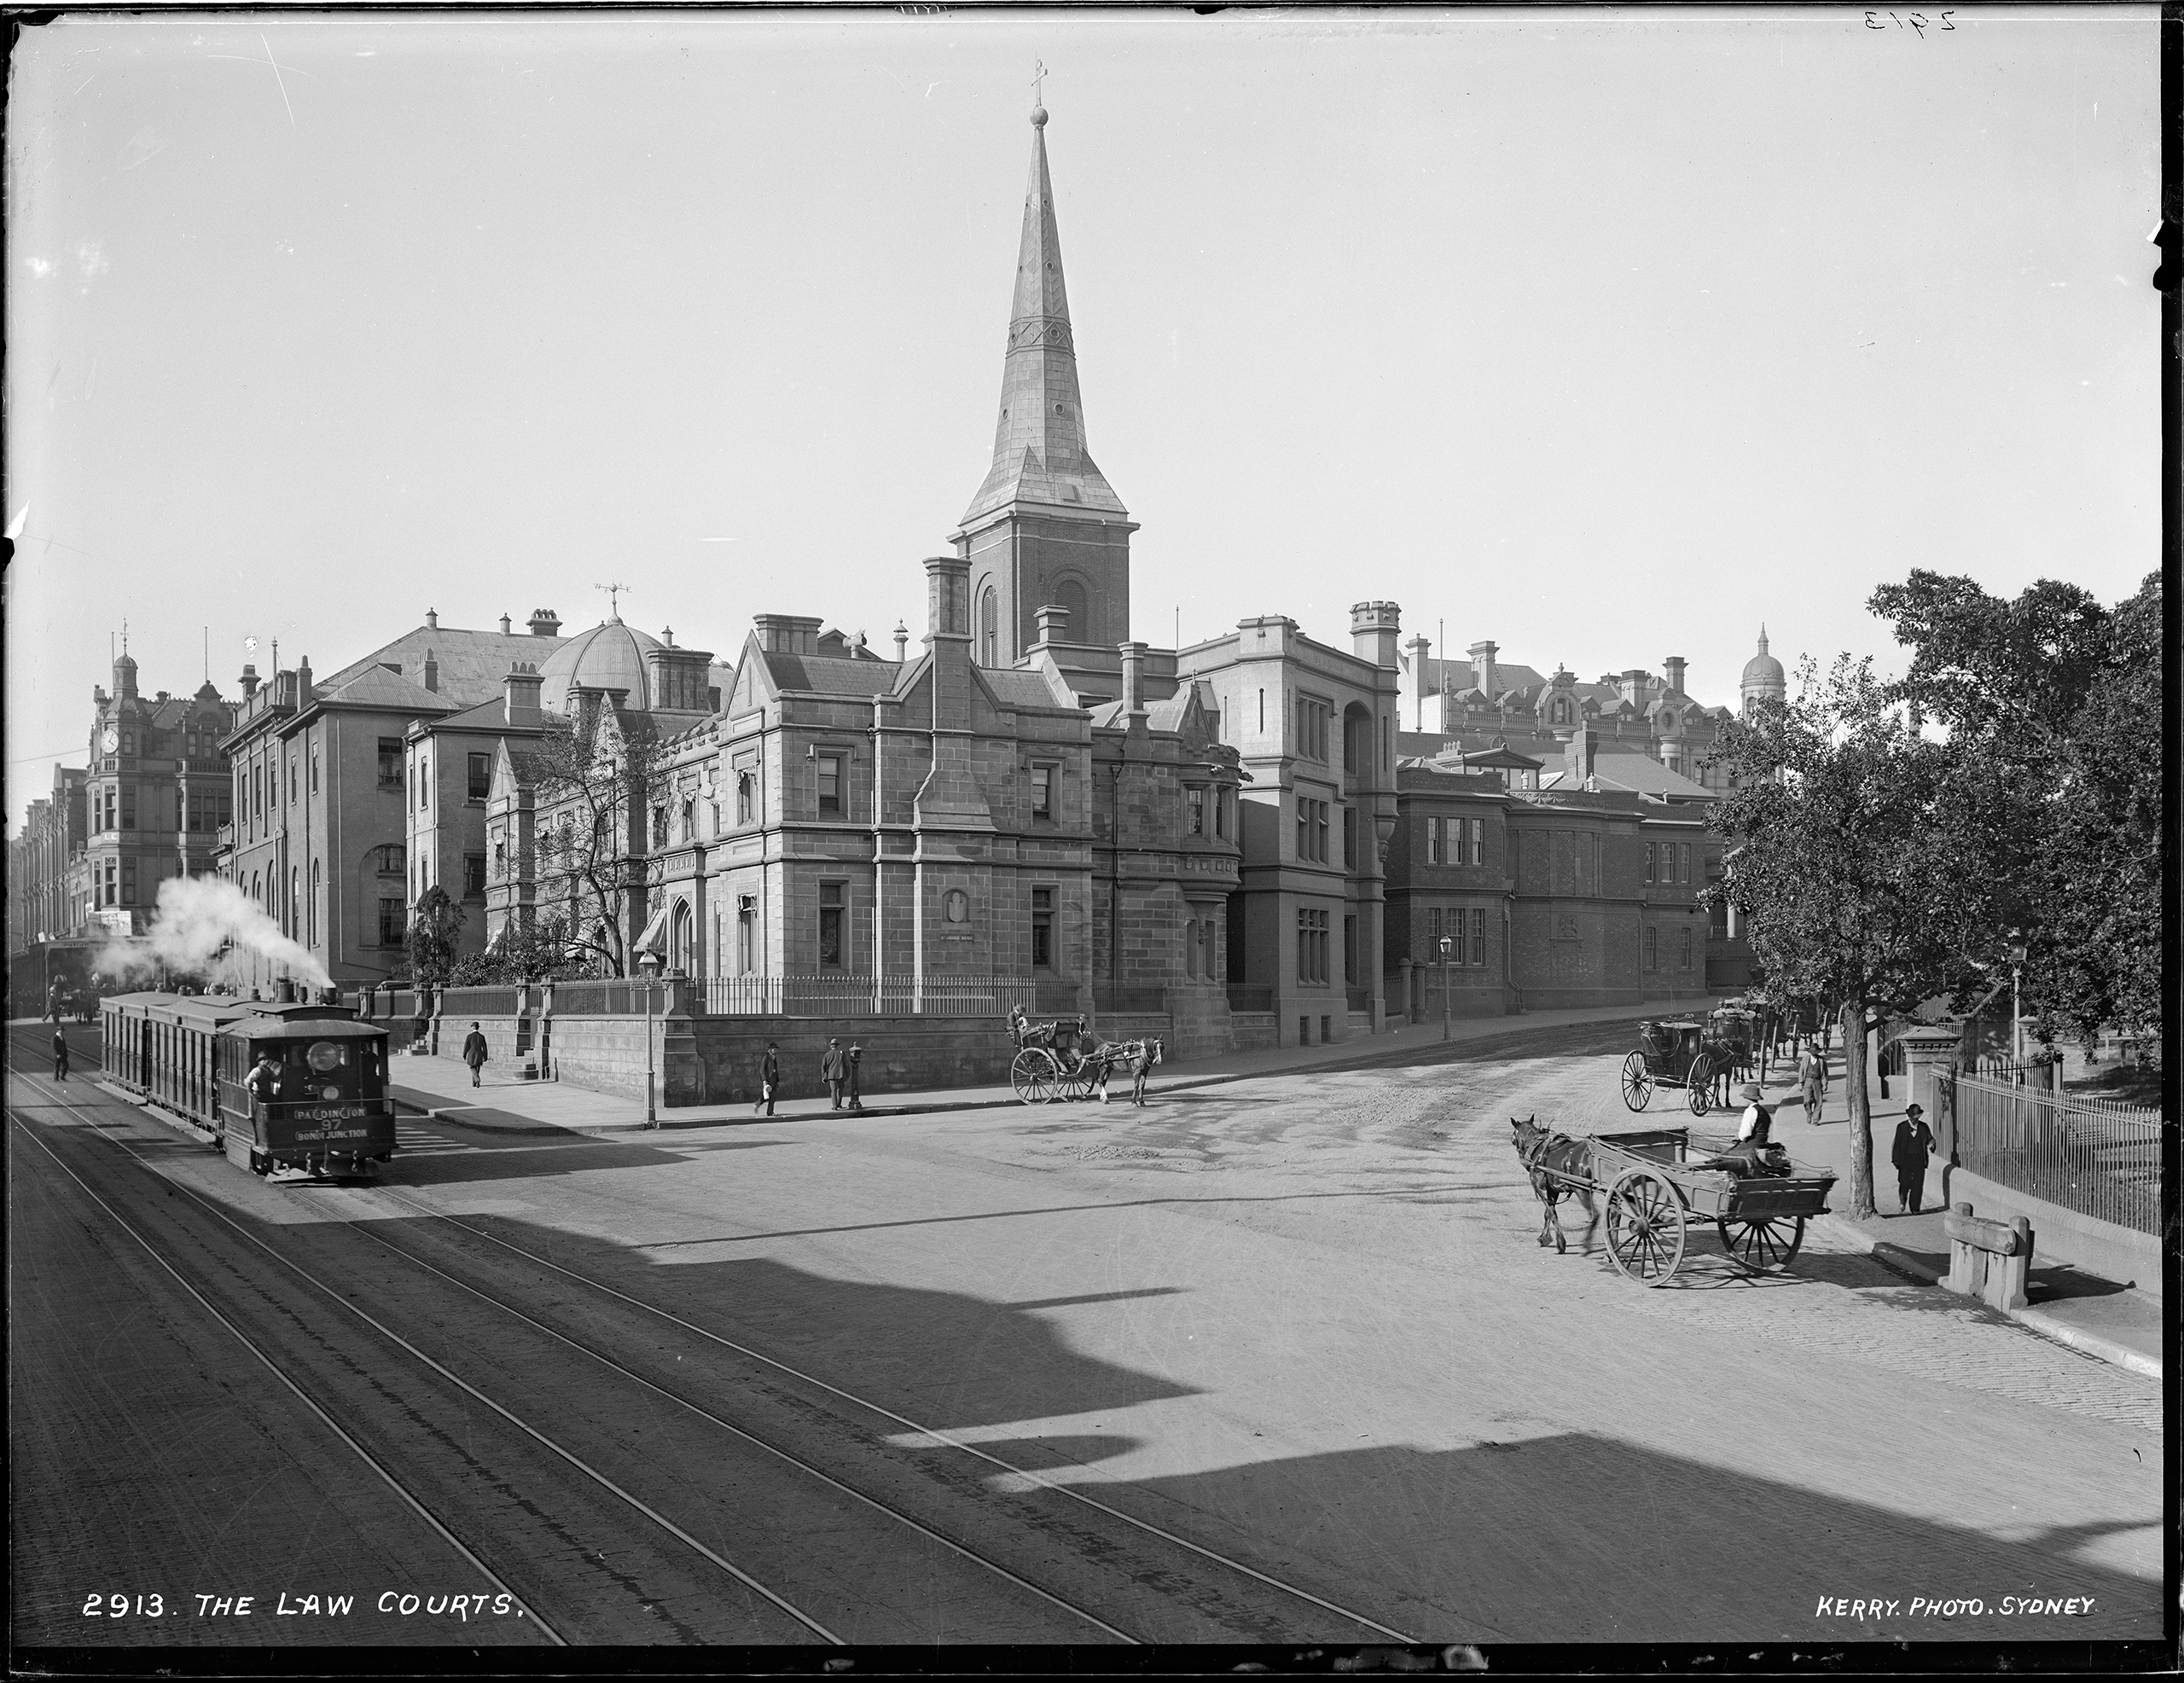 Glass plate negative of law courts in Sydney